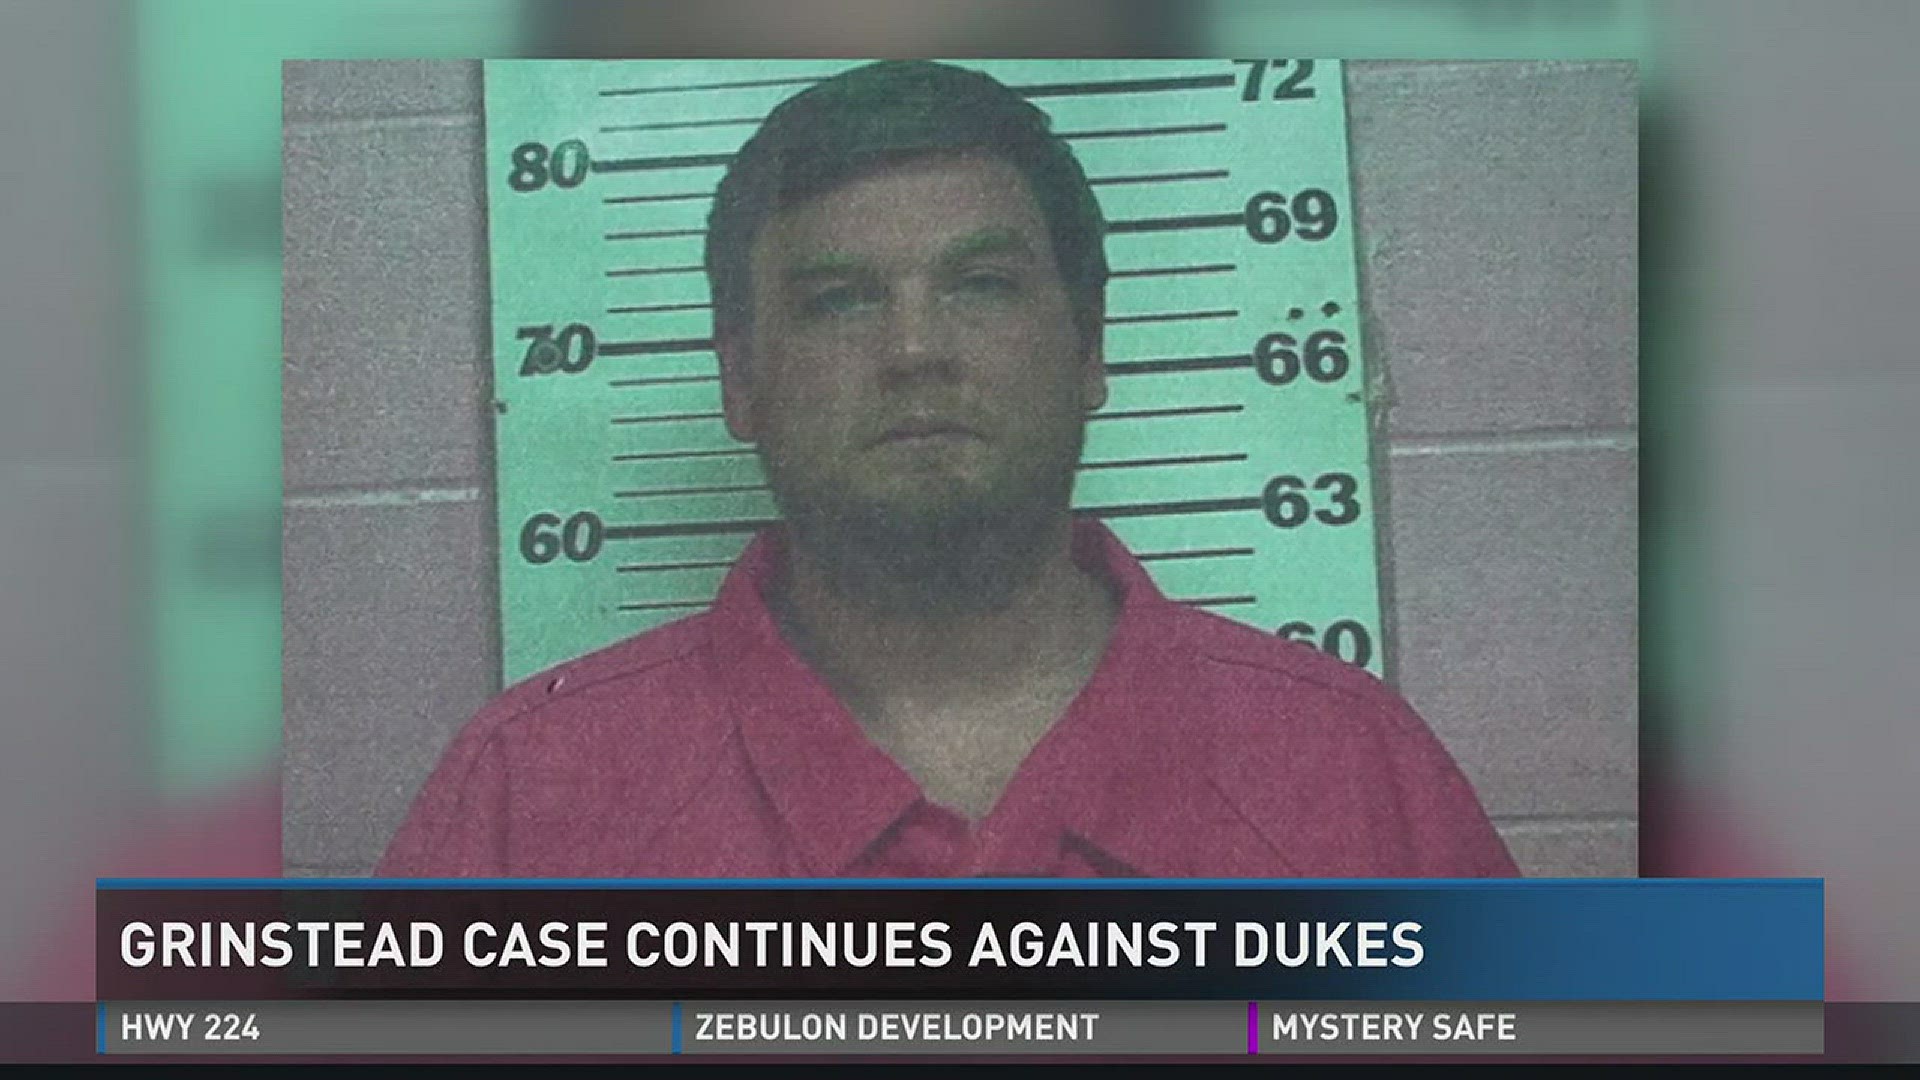 Grinstead case continues against Dukes